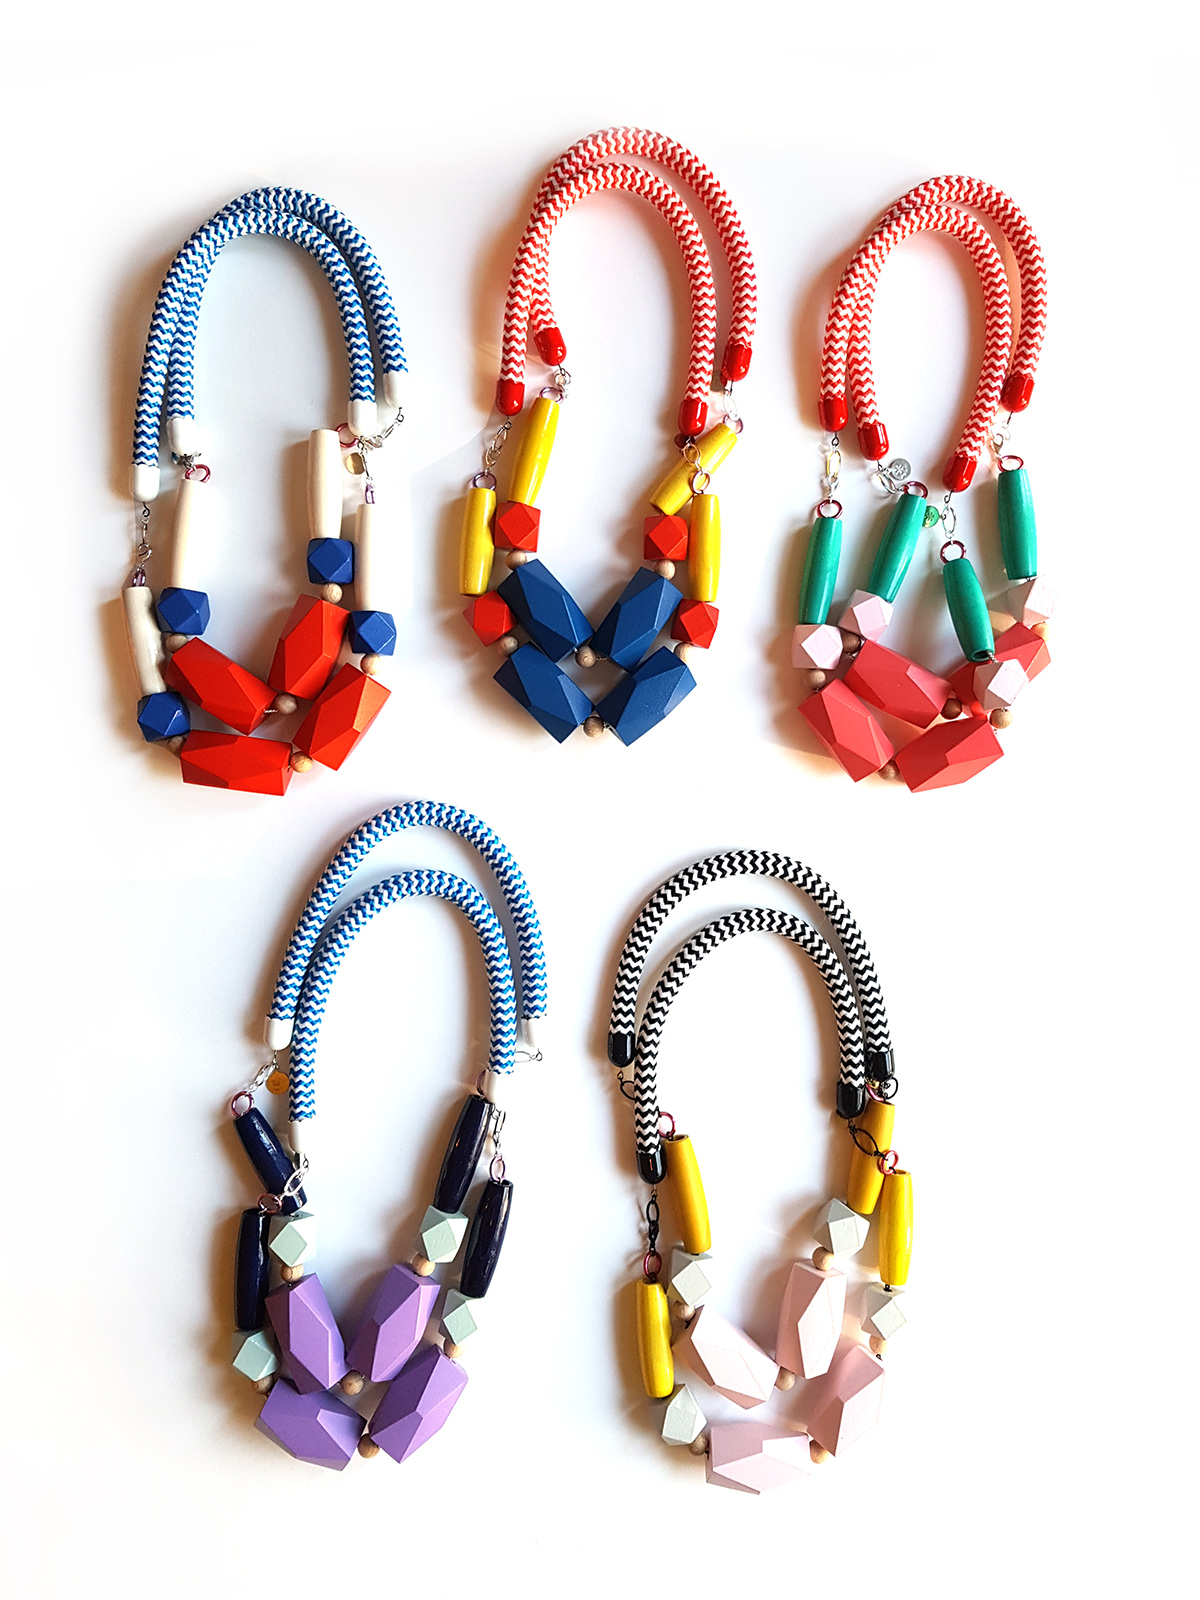 New Pop-a-porter's exclusive rope necklaces for Unlimited Shop Uk color collection